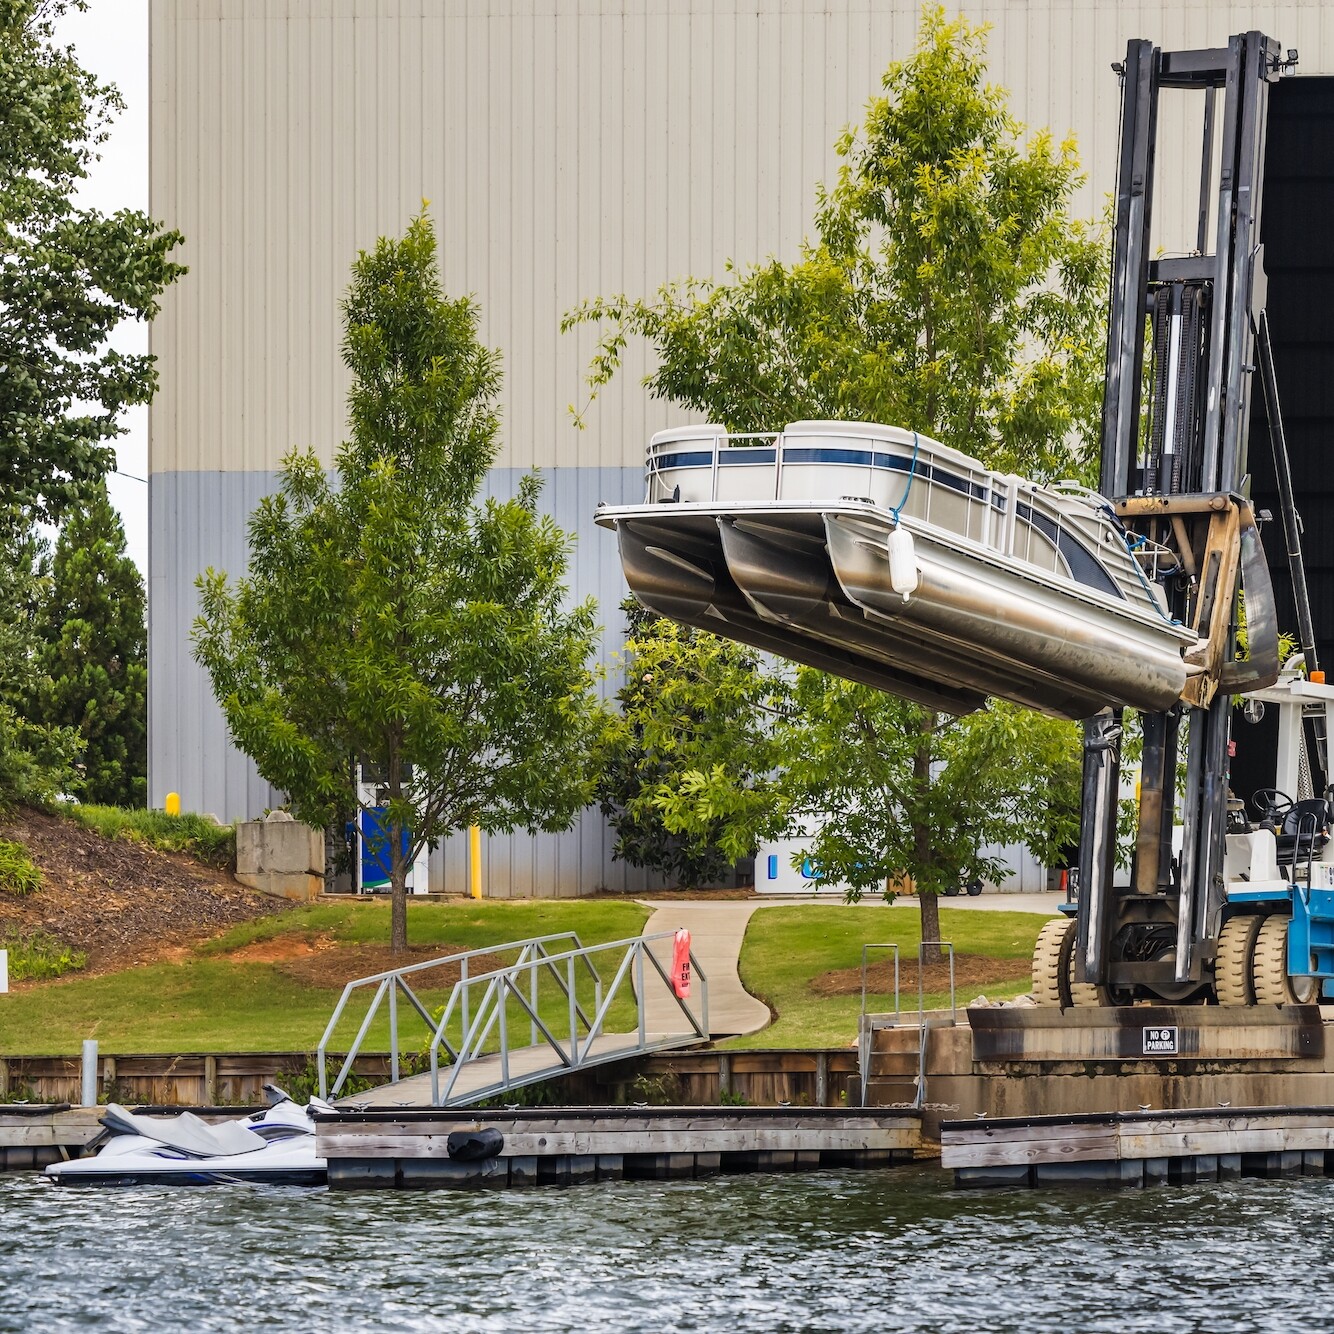 Pontoon boat removed from dry dock marina storage resting on fork lift ready for launch.